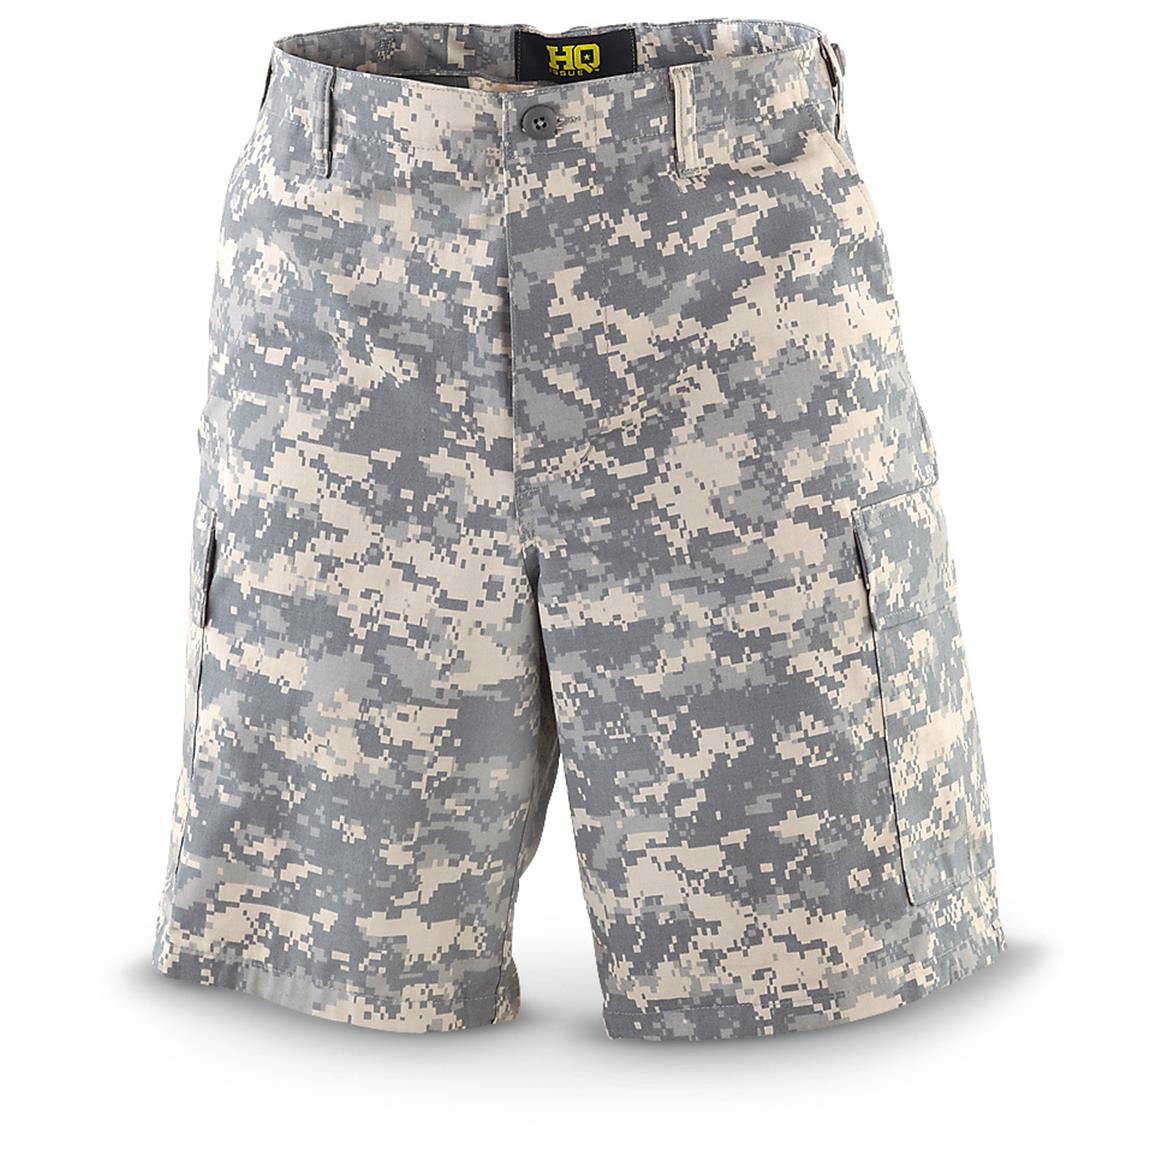 HQ ISSUE Military-Style BDU Cotton Ripstop Shorts - 592362, Tactical ...